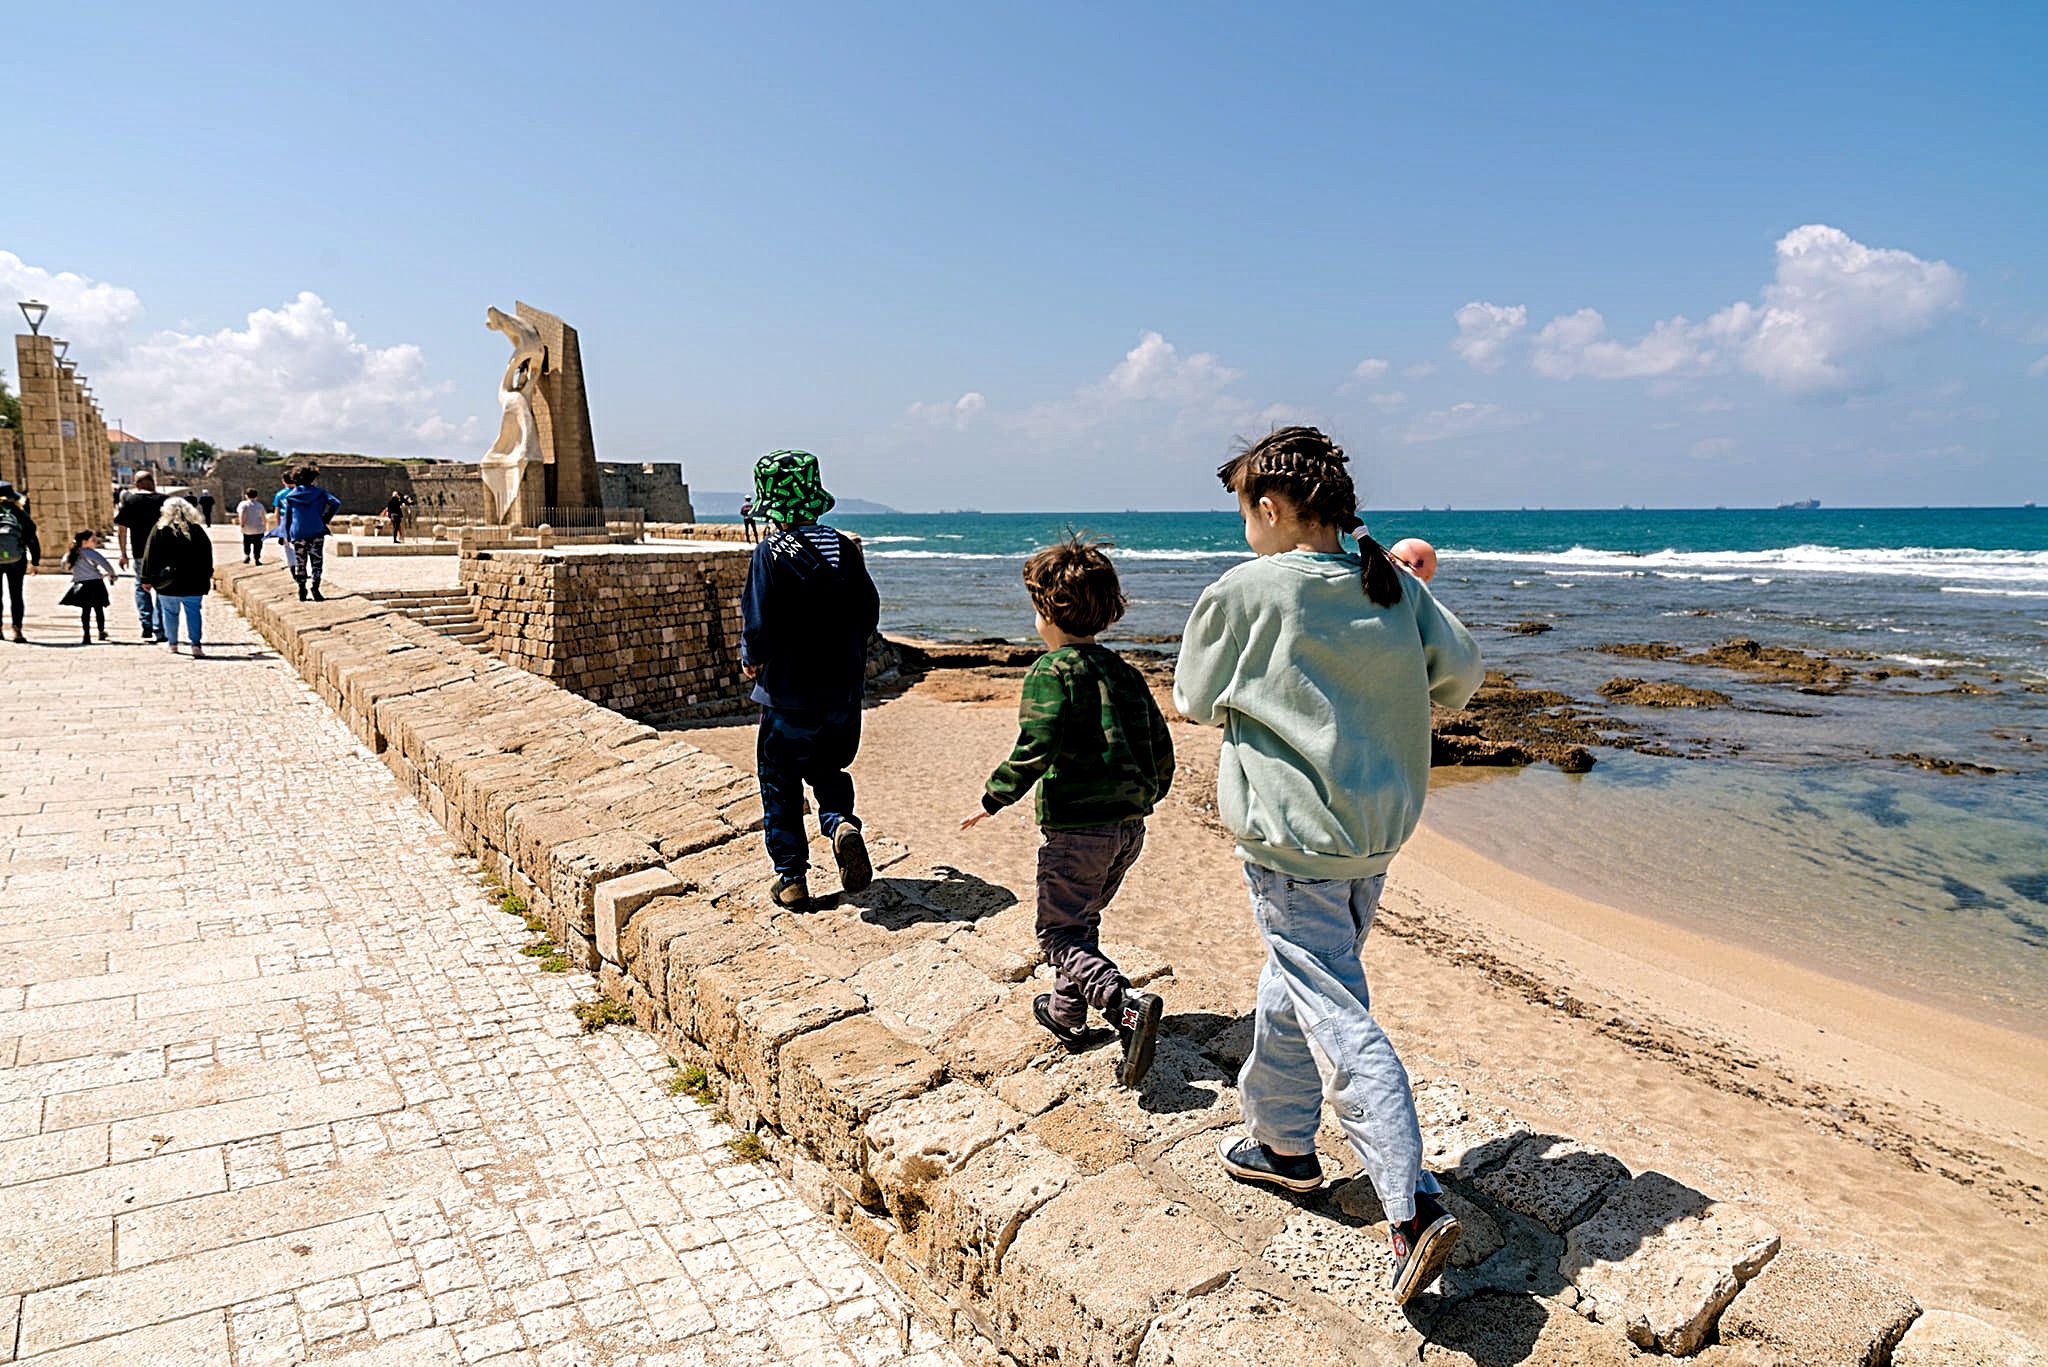 Children walking by the sea in Acre, Israel